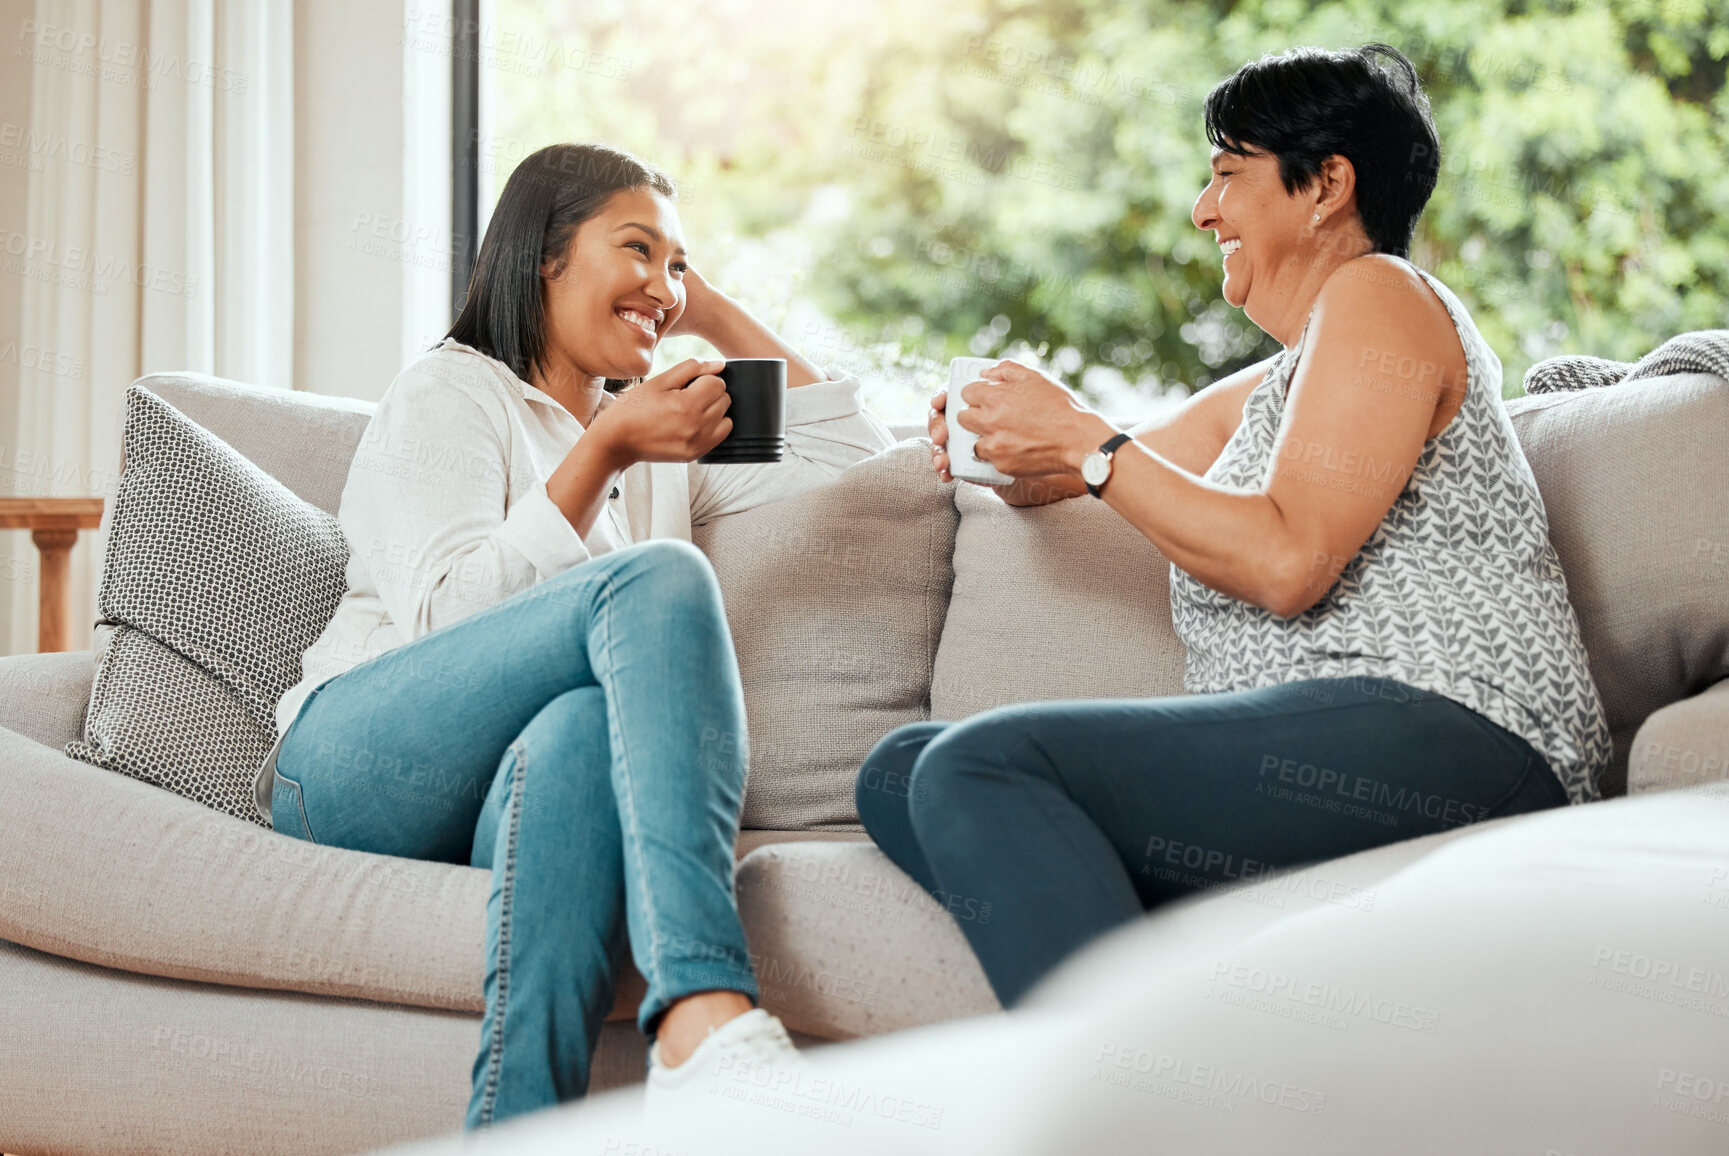 Buy stock photo Shot of a senior woman bonding with her daughter on the sofa at home